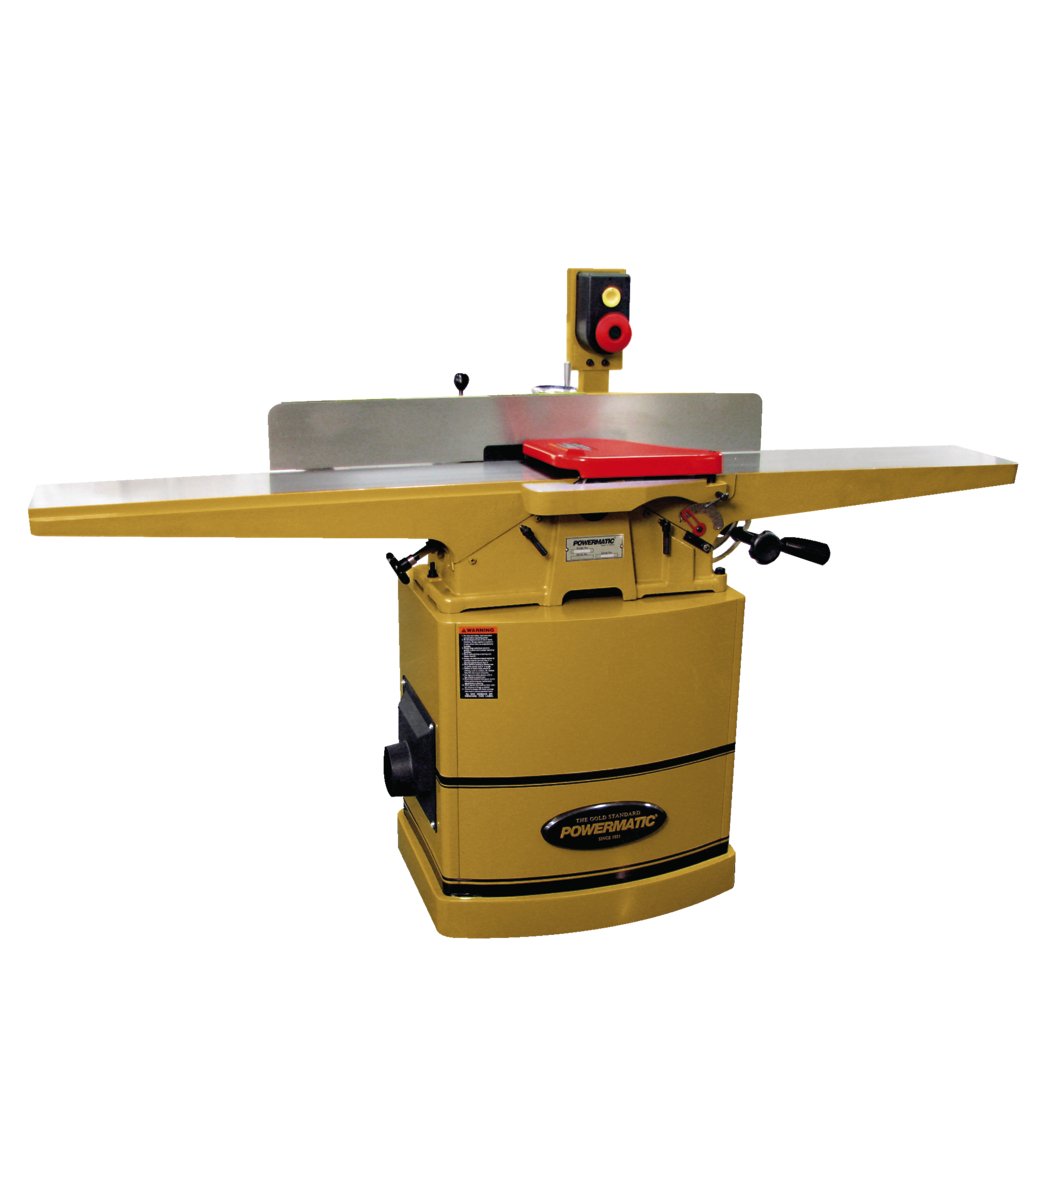 60HH 8" Jointer, 2HP 1PH 230V, Helical Head - Diamond Tool Store